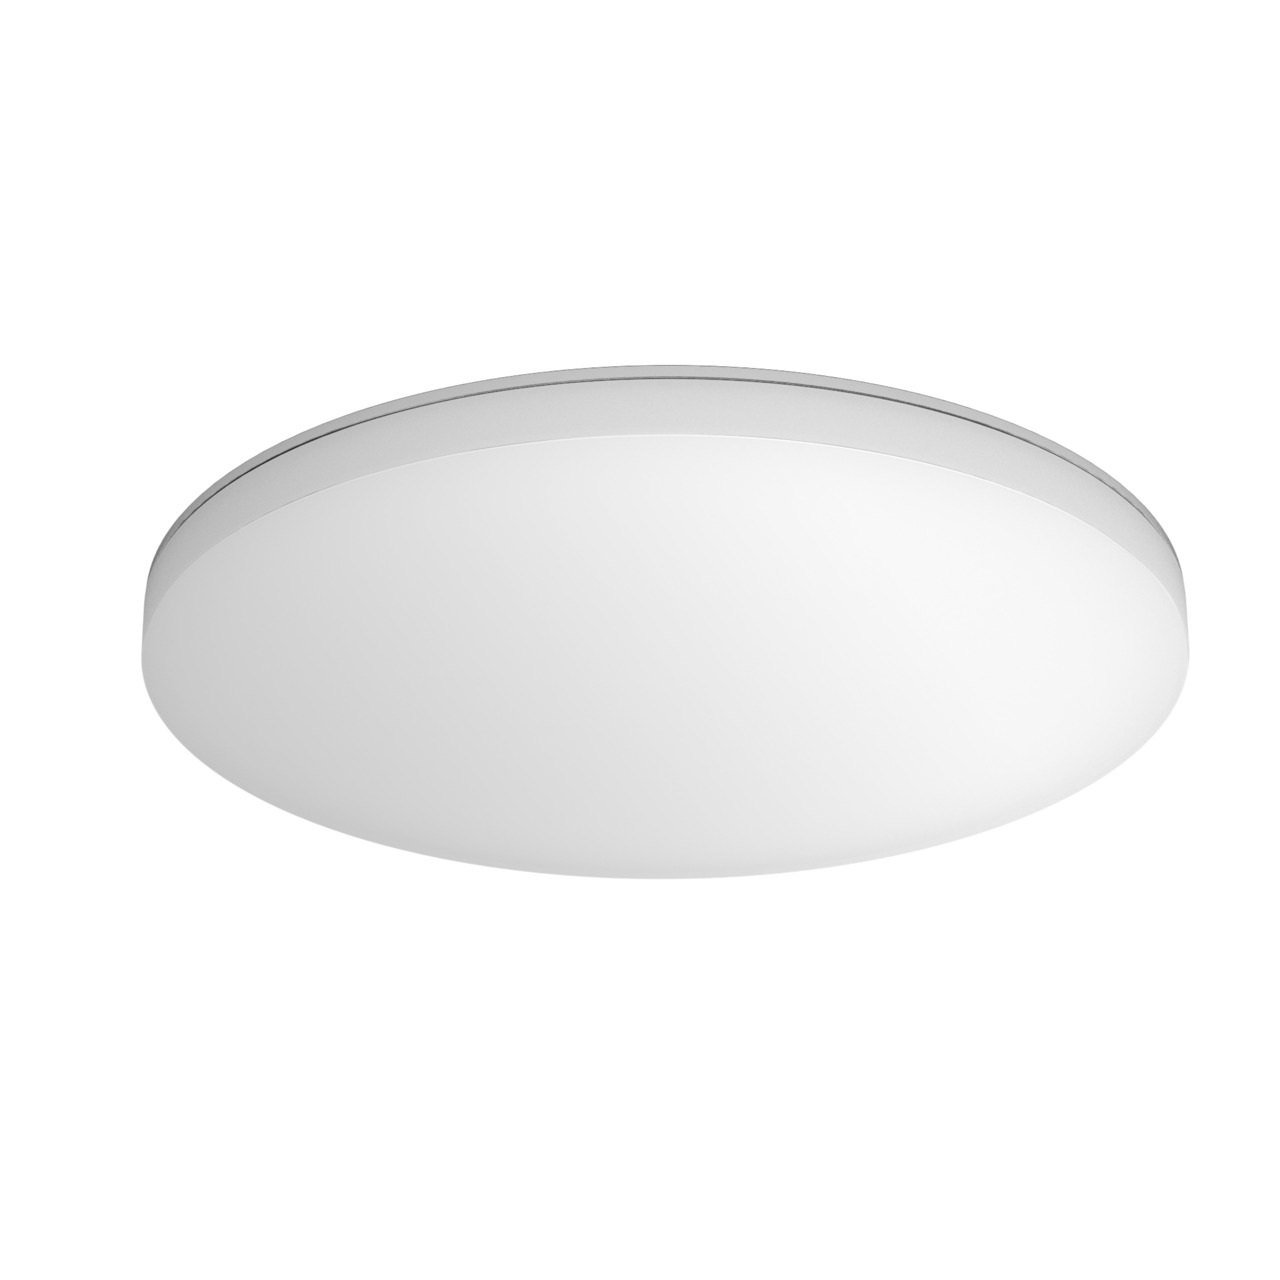 Steinel LED indoor luminaire RS PRO R30 PLUS SC NW